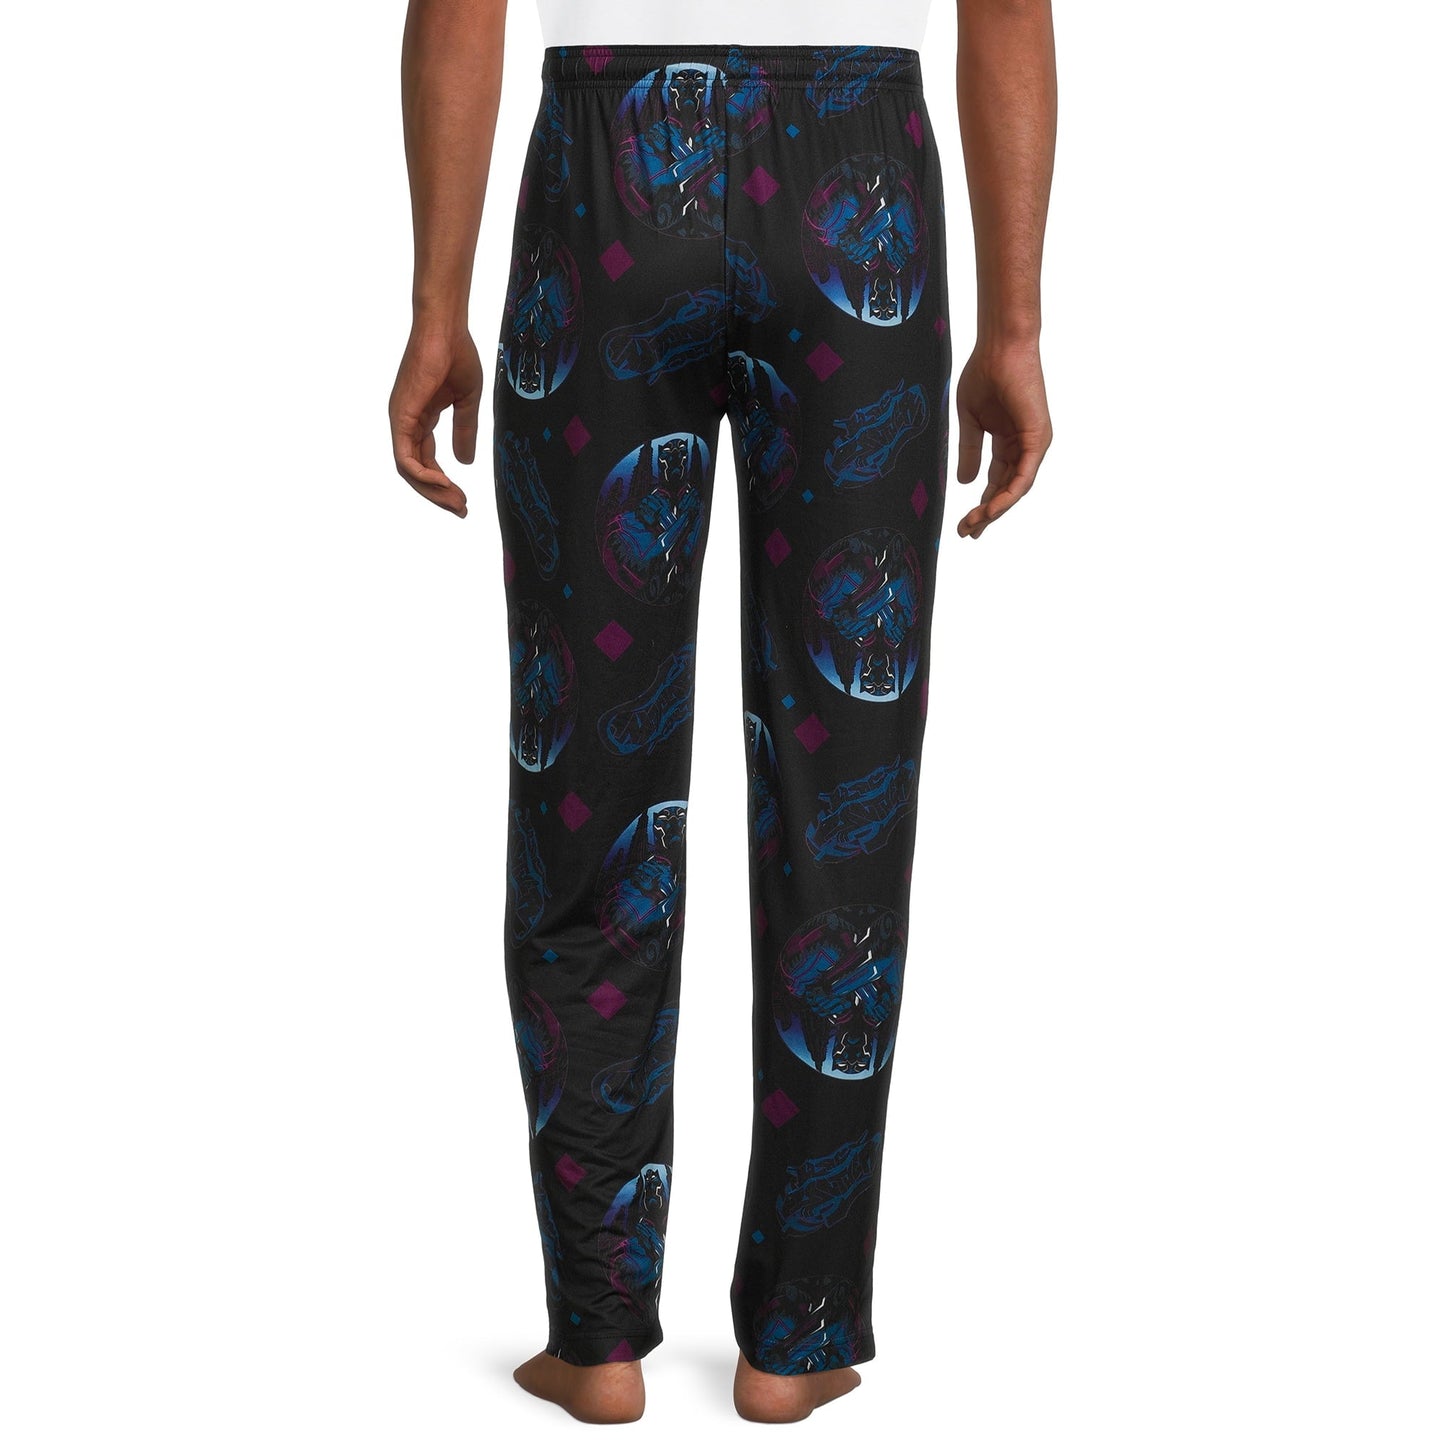 Black Panther Adult Men's All Over Print Sleep Pants Multicolor